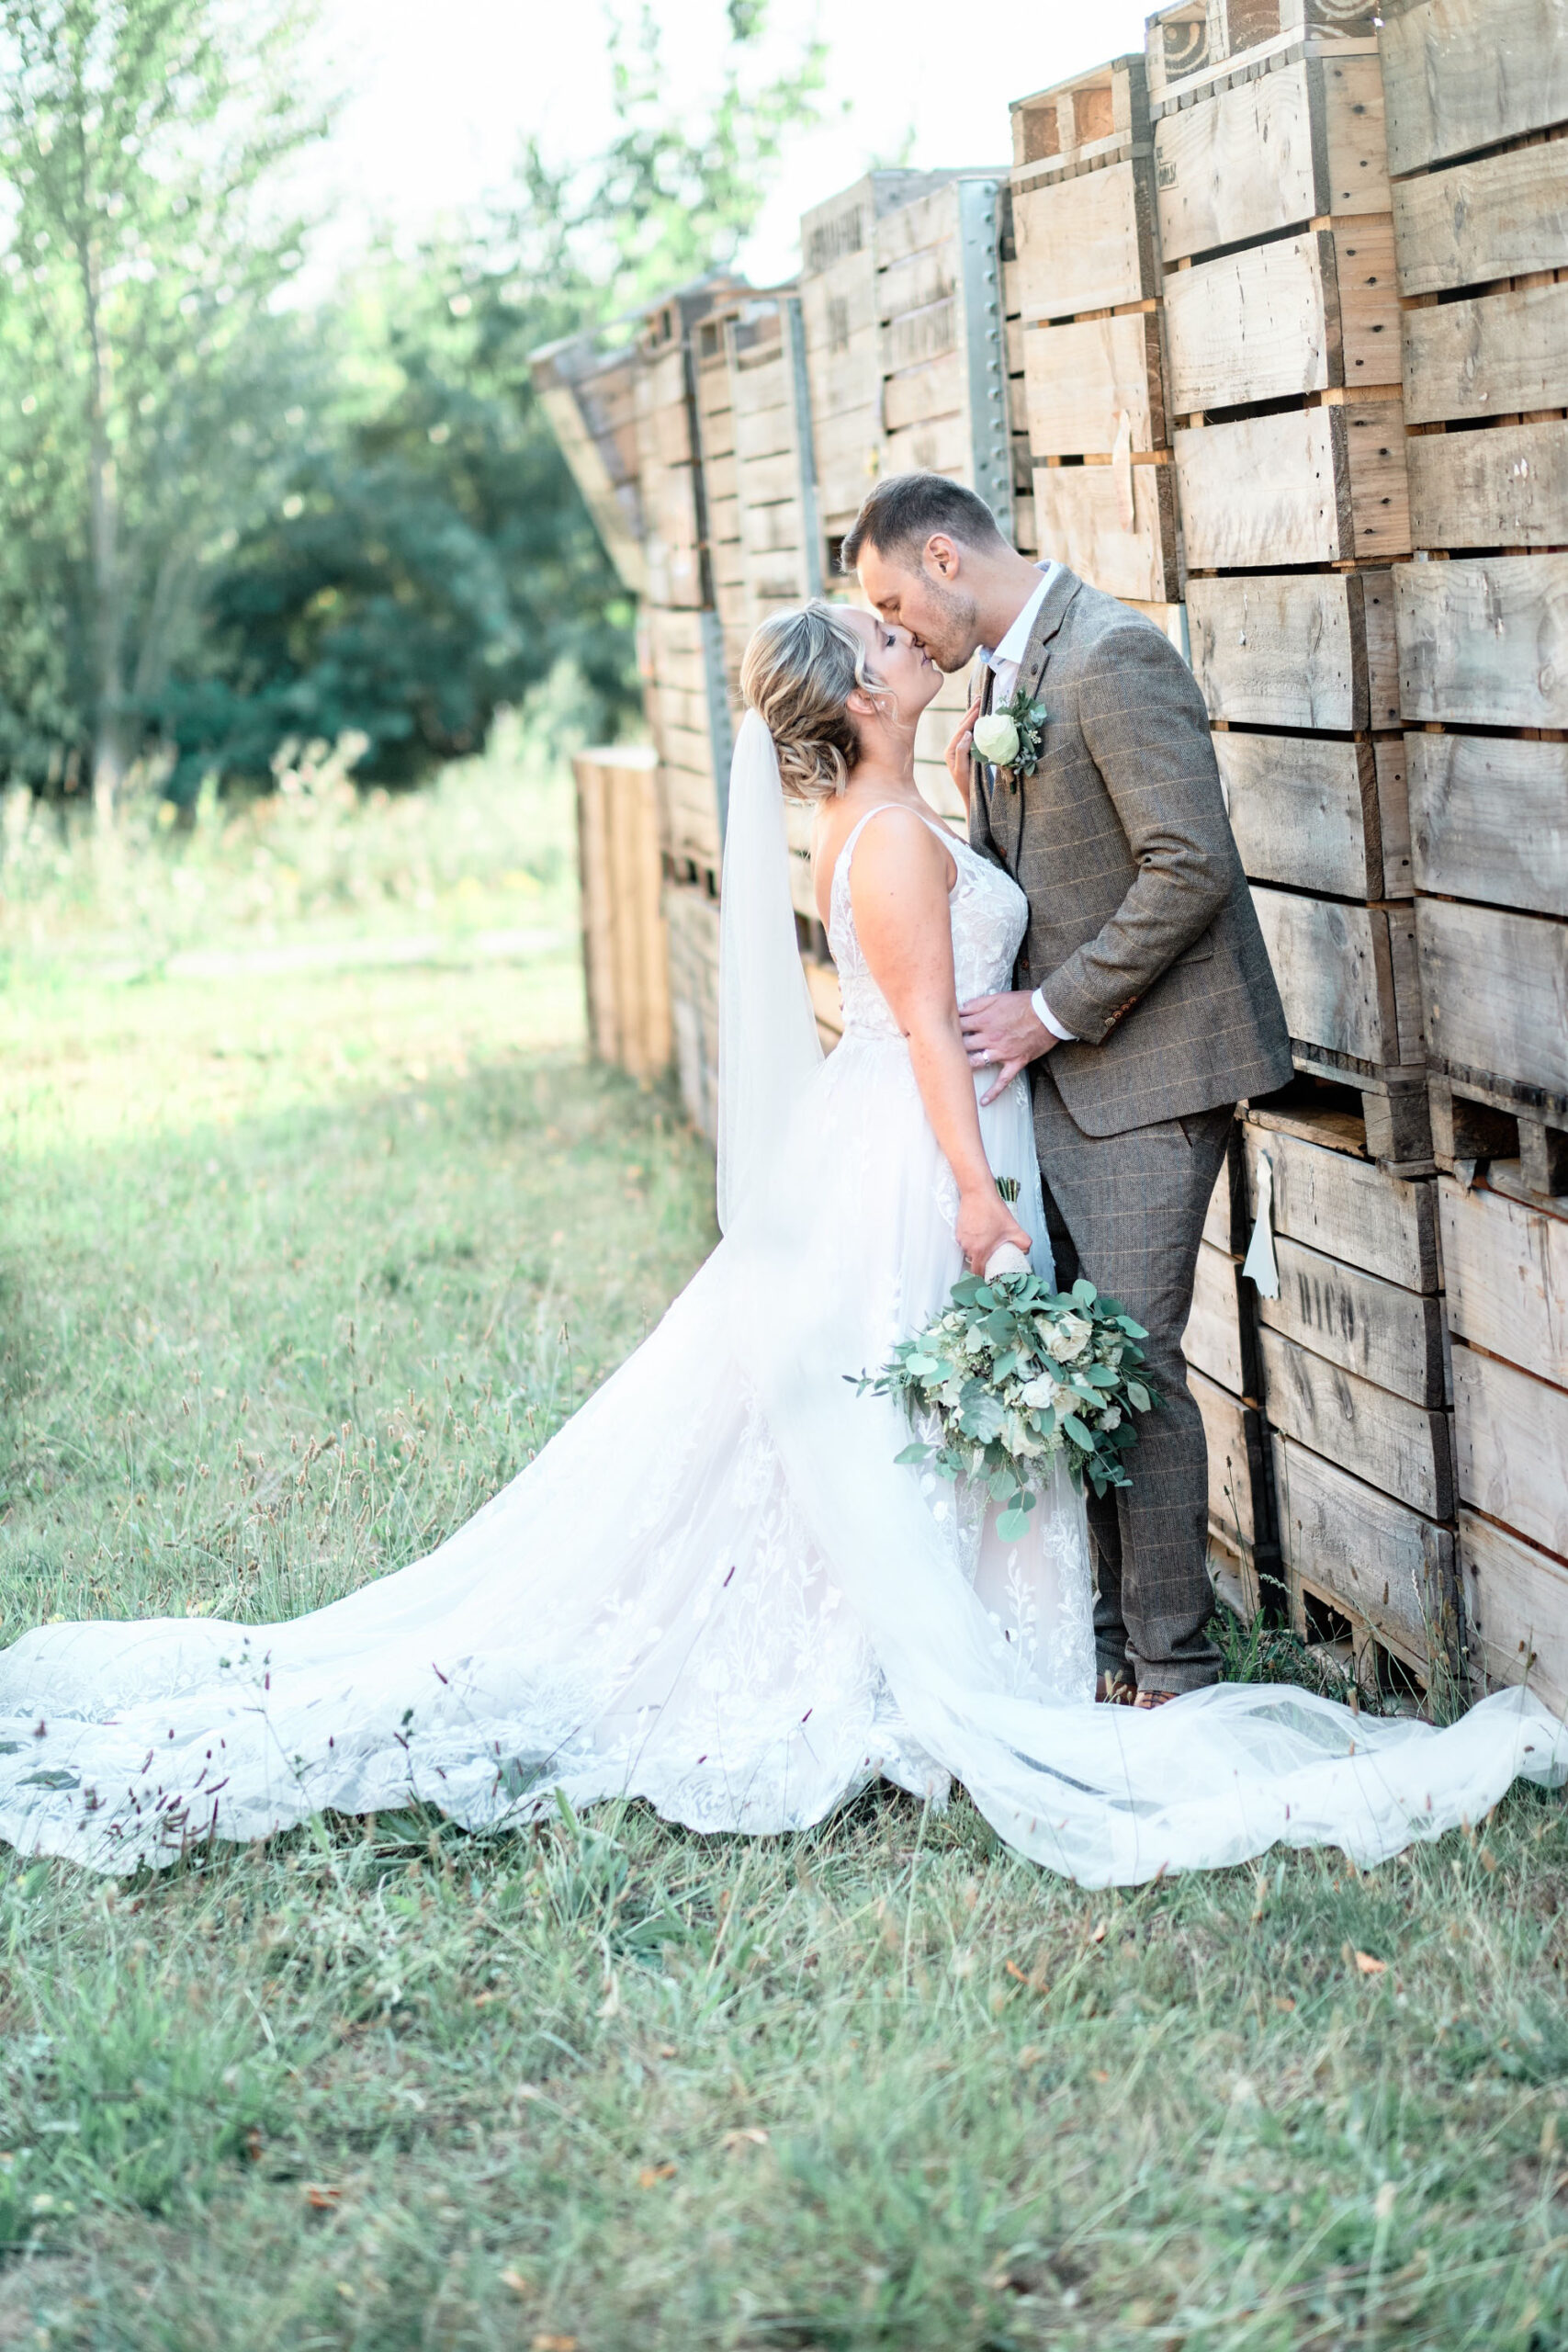 A groom and bride kiss by a rustic wooden fence. He's in a brown suit and she's in a white dress with veil holding a bouquet. By Howling Basset Photography